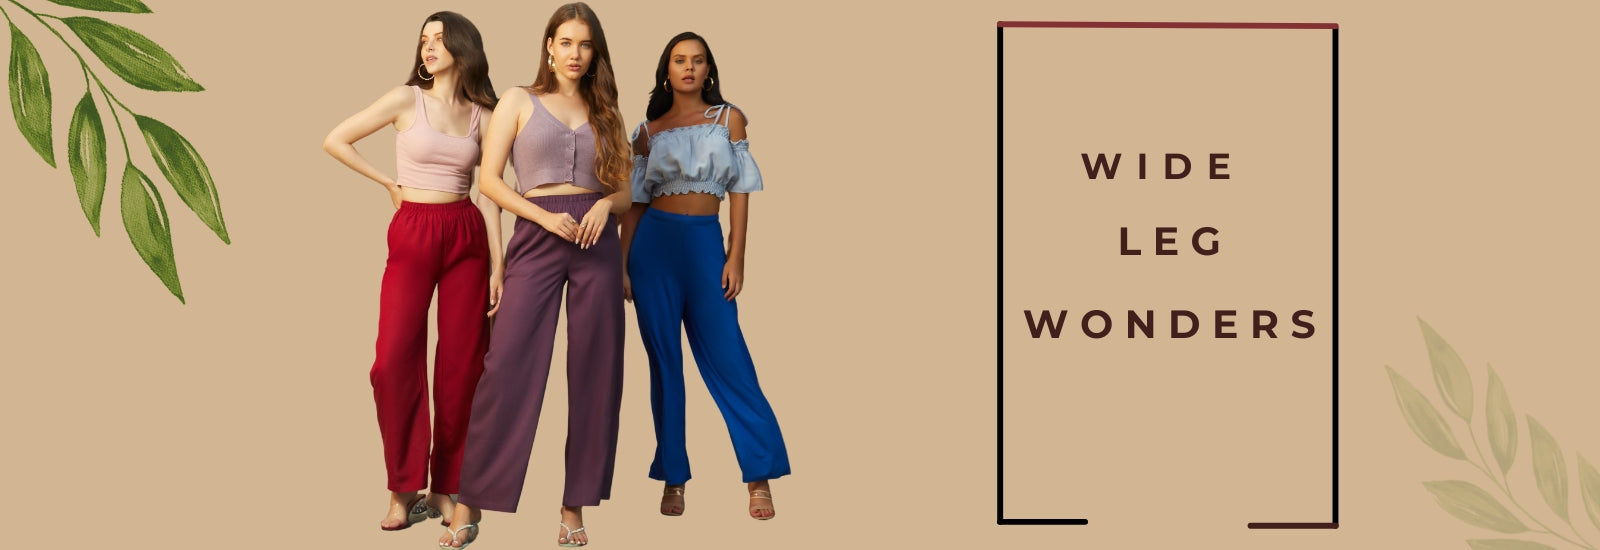 Wide Leg Wonders by Go Colors: Pants for every shade of you!